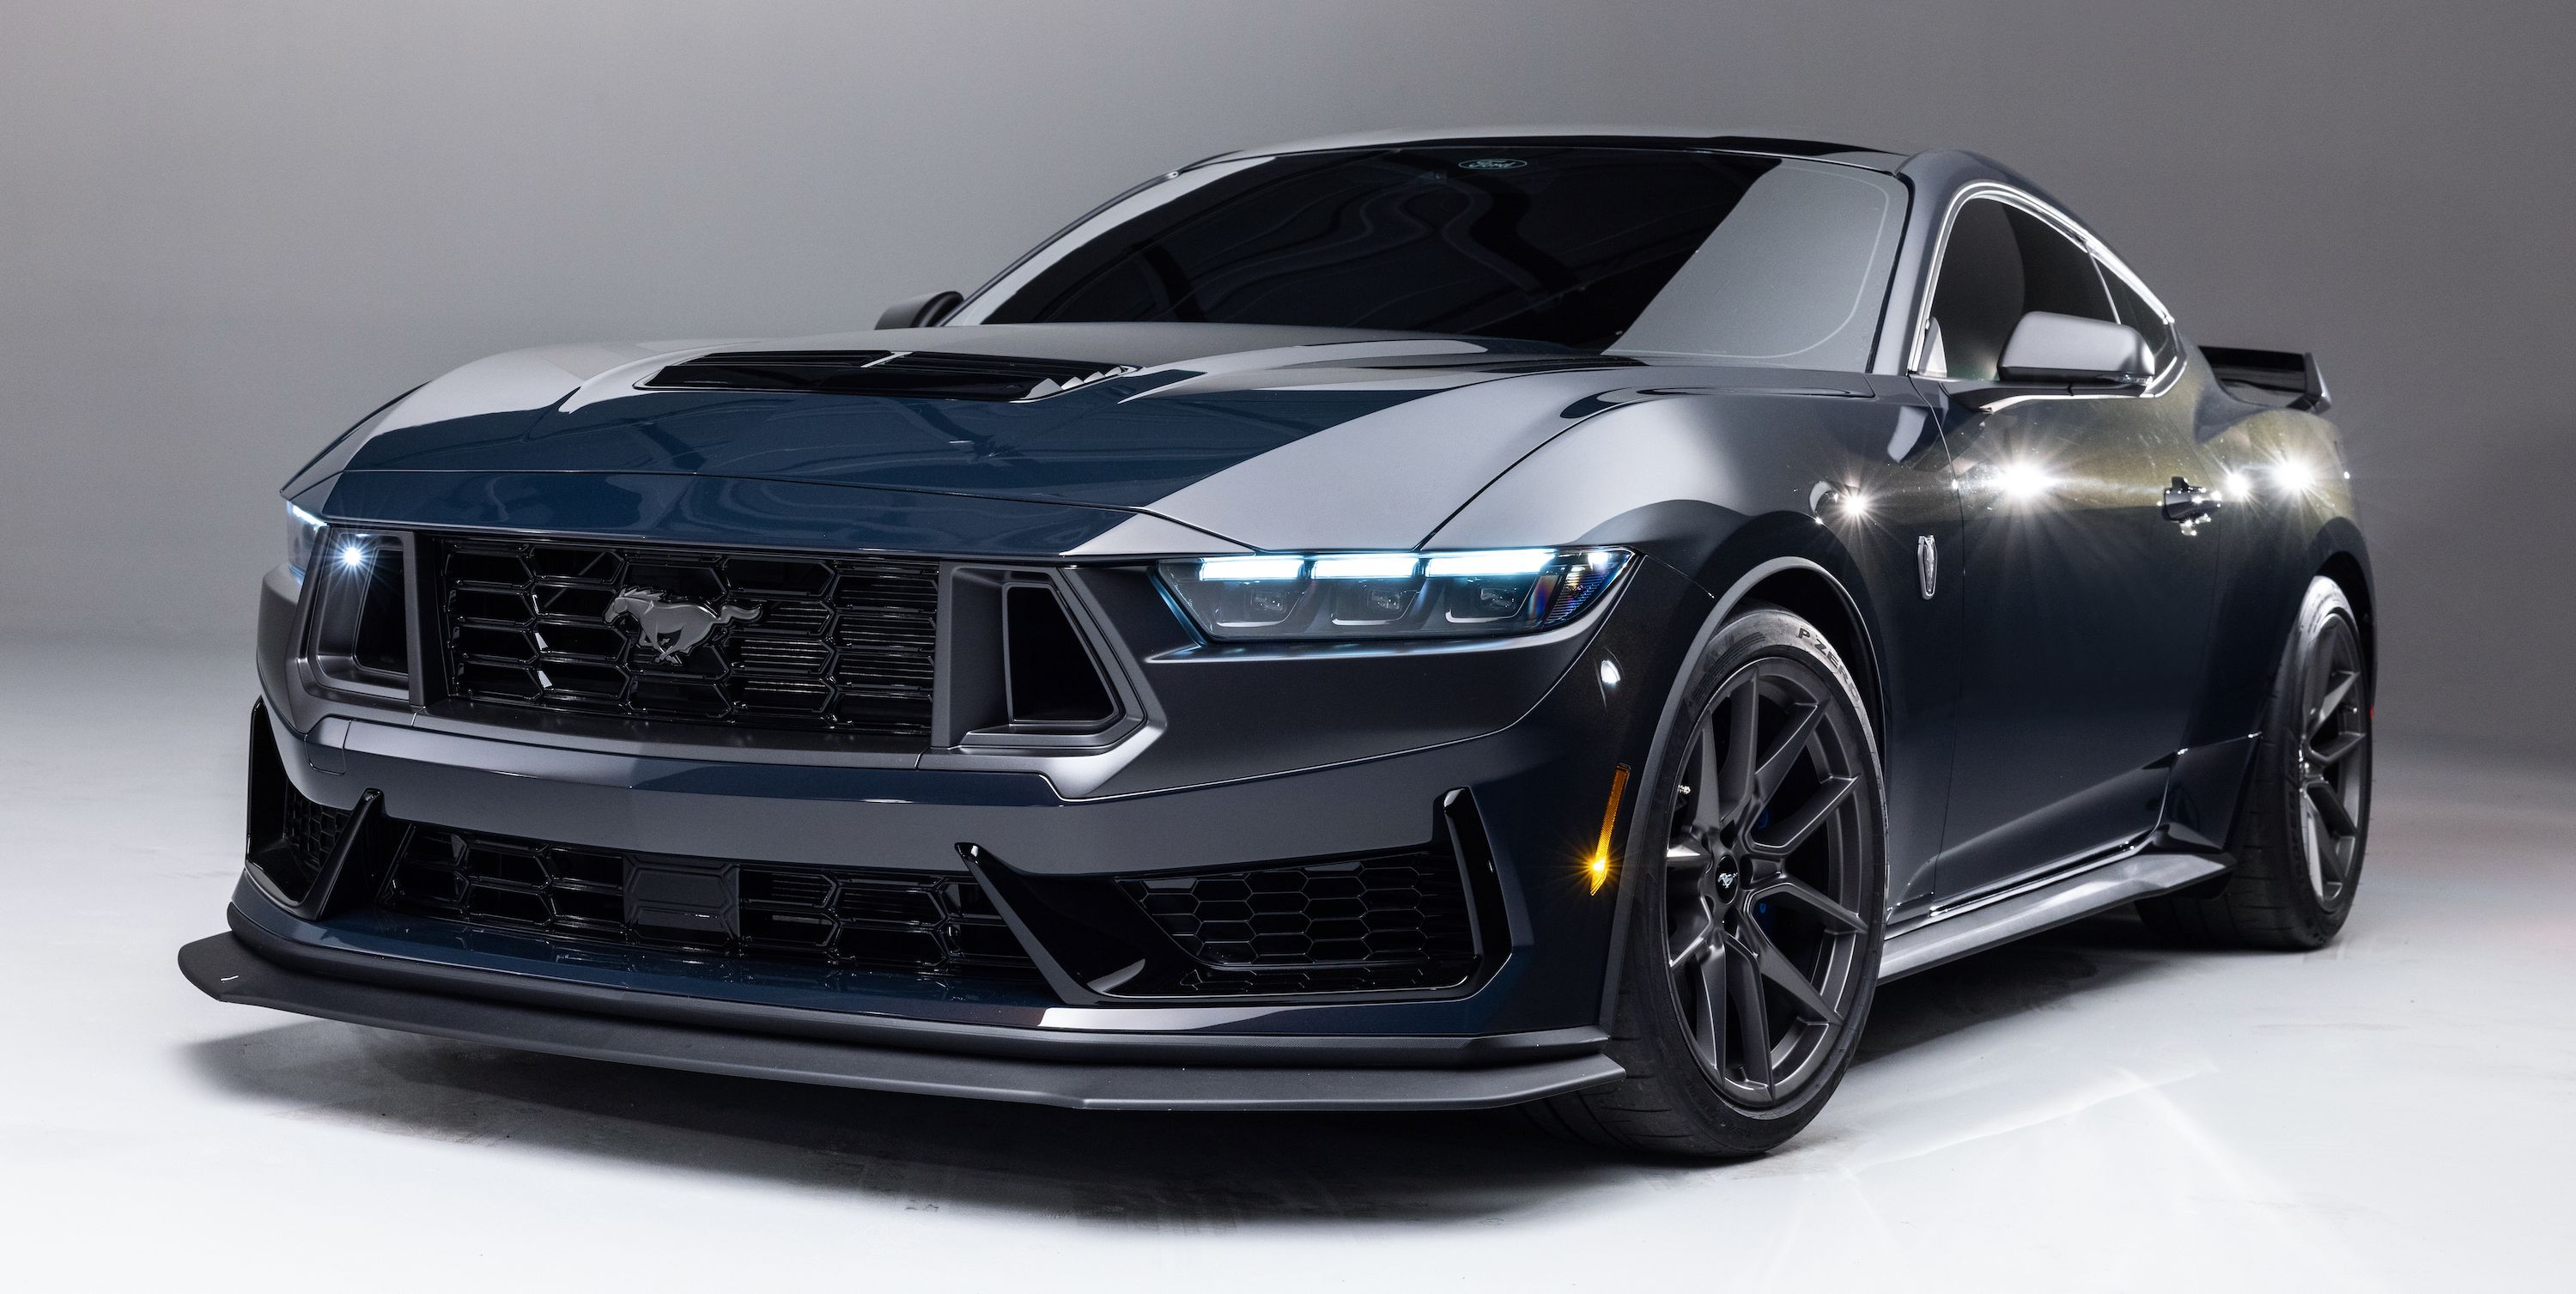 The Ford Mustang Dark Horse Is the New Pony Car King